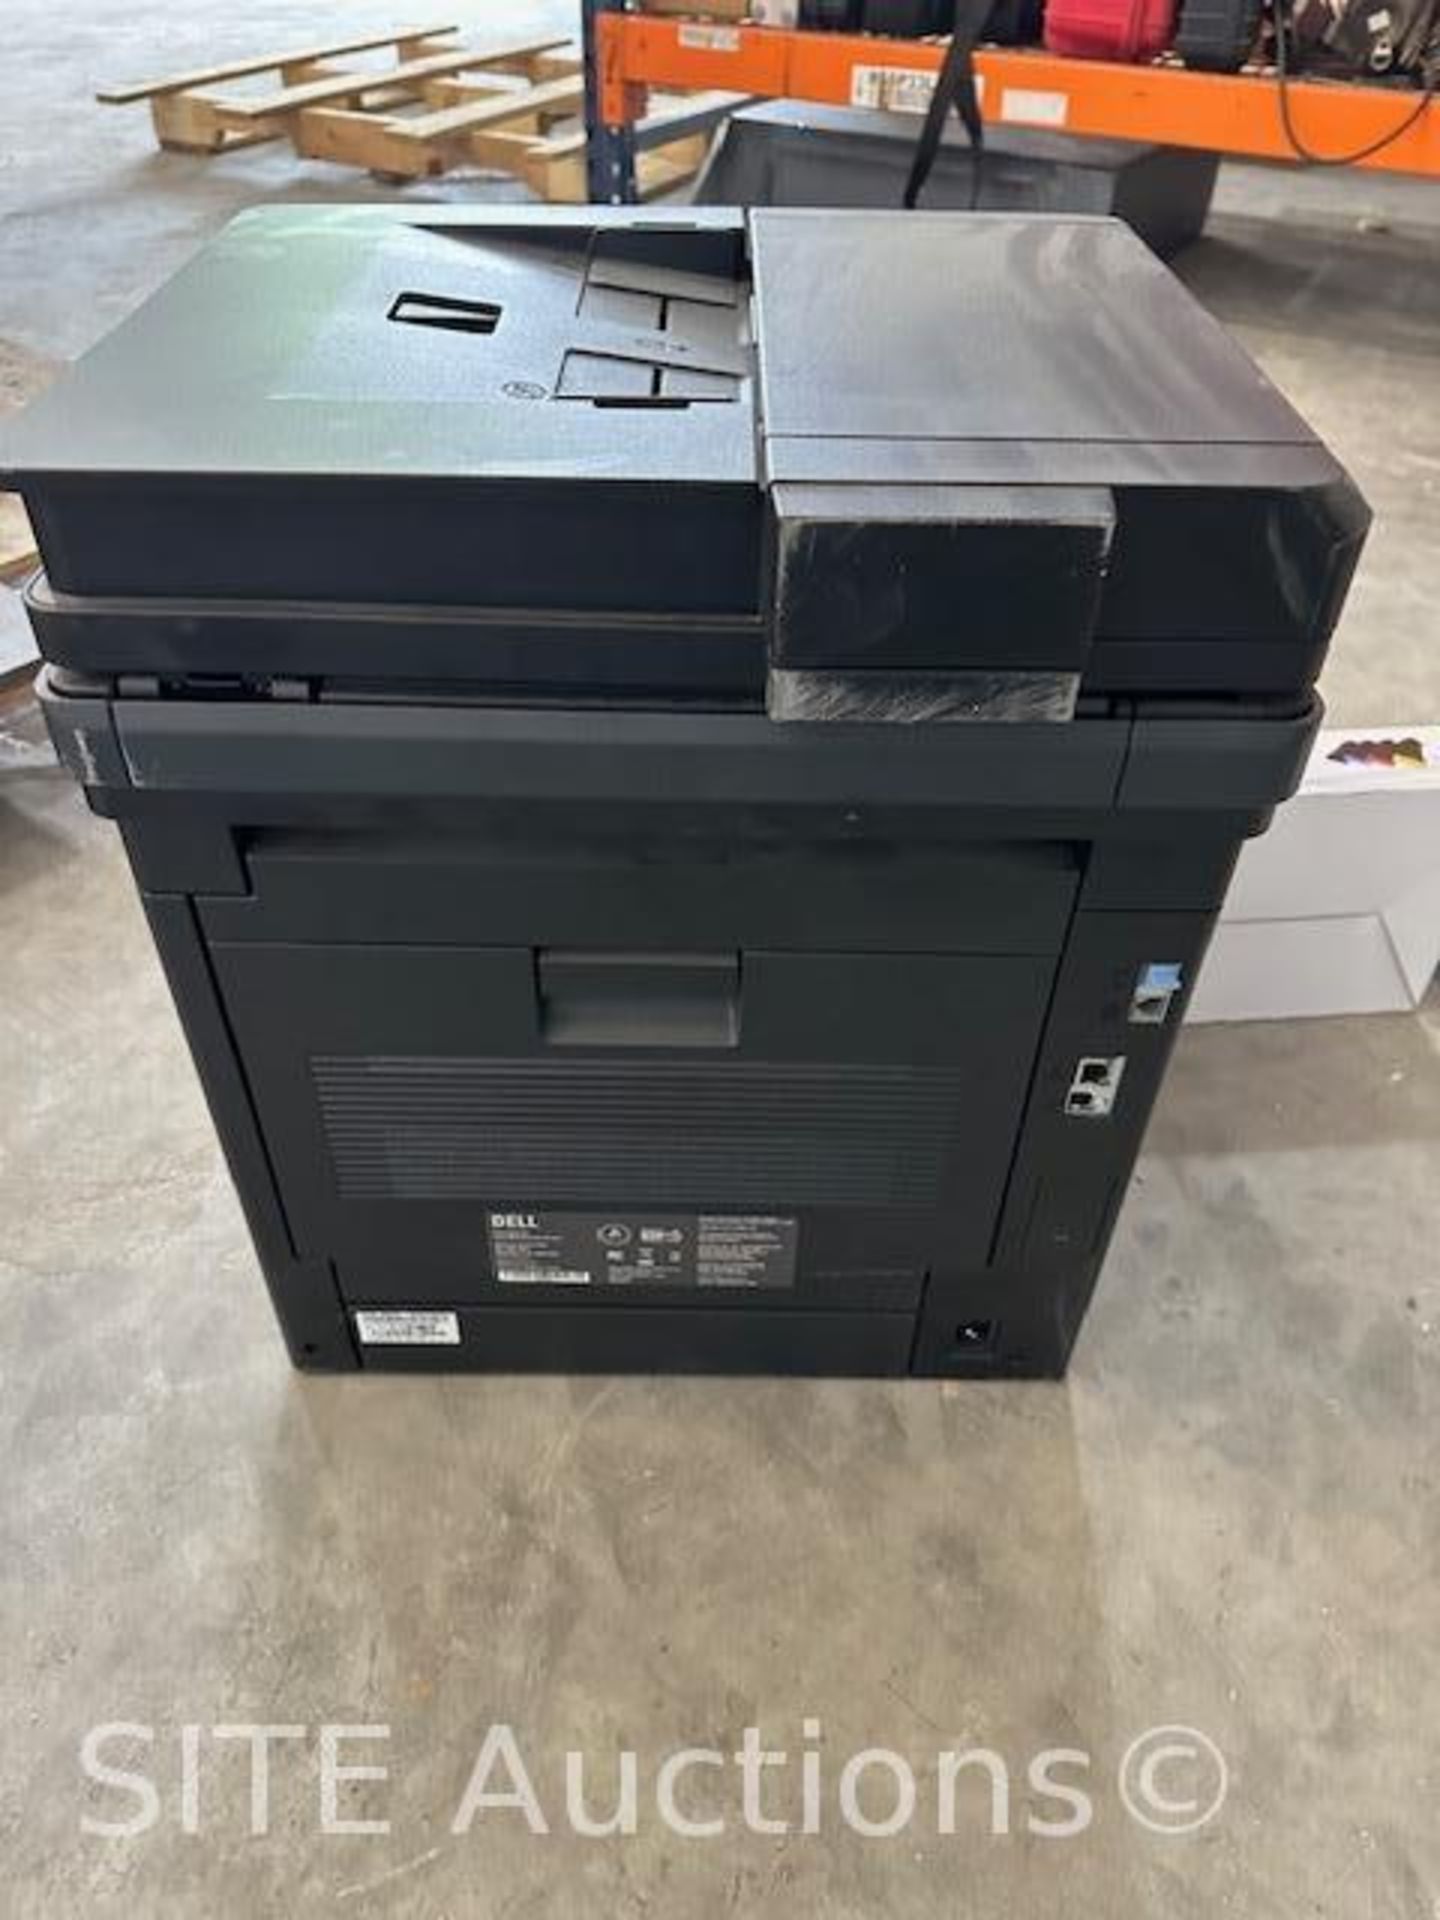 Dell Color Smart H625cdw Multifunction Printer - Image 5 of 6